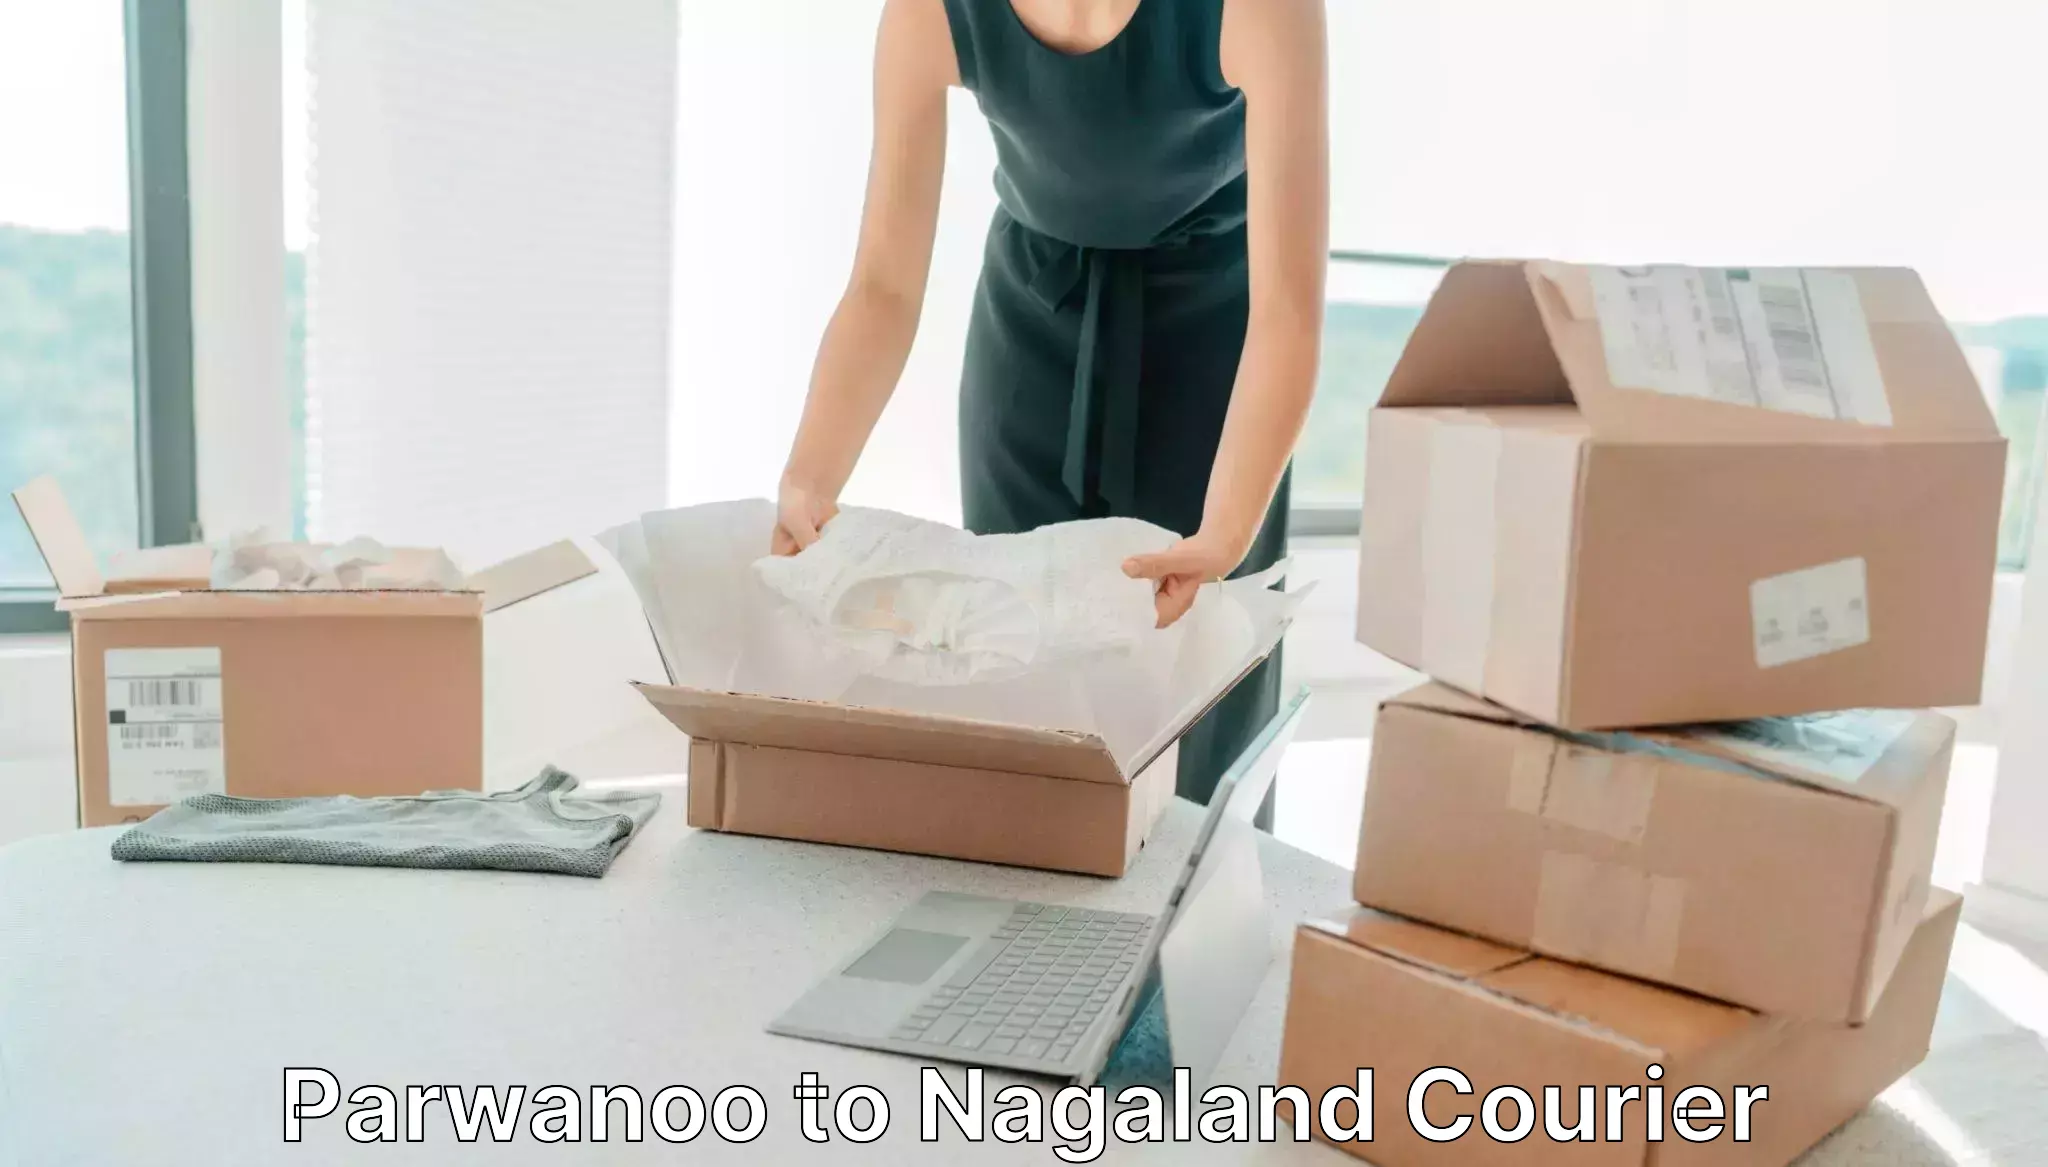 Multi-national courier services Parwanoo to Mon